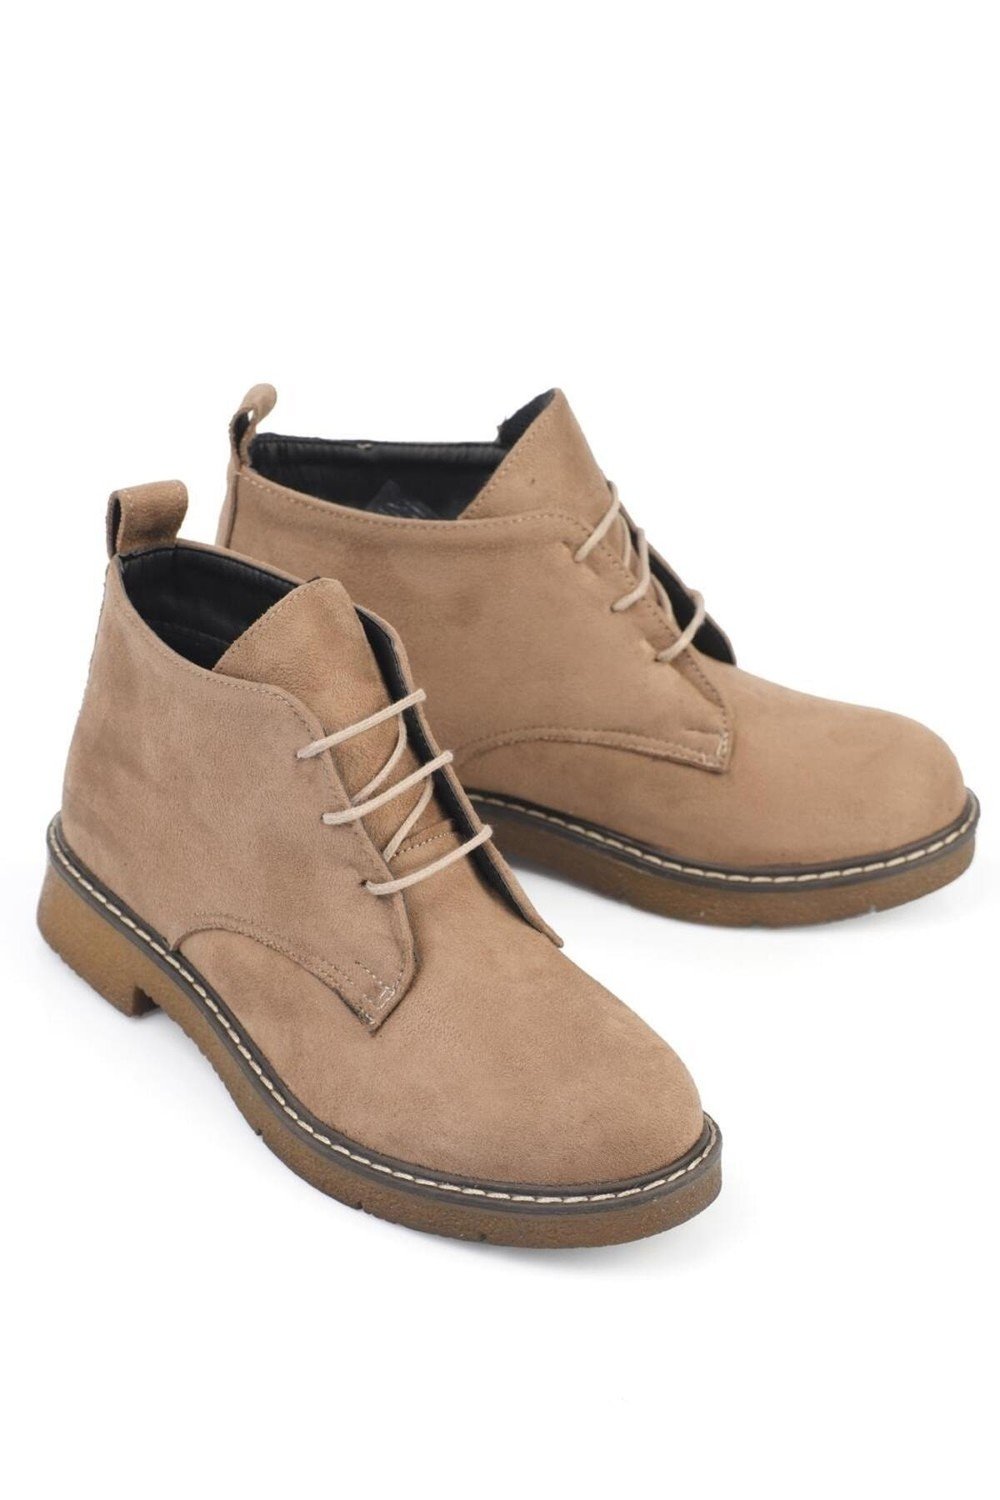 Capone Outfitters Ankle Boots - Brown - Flat